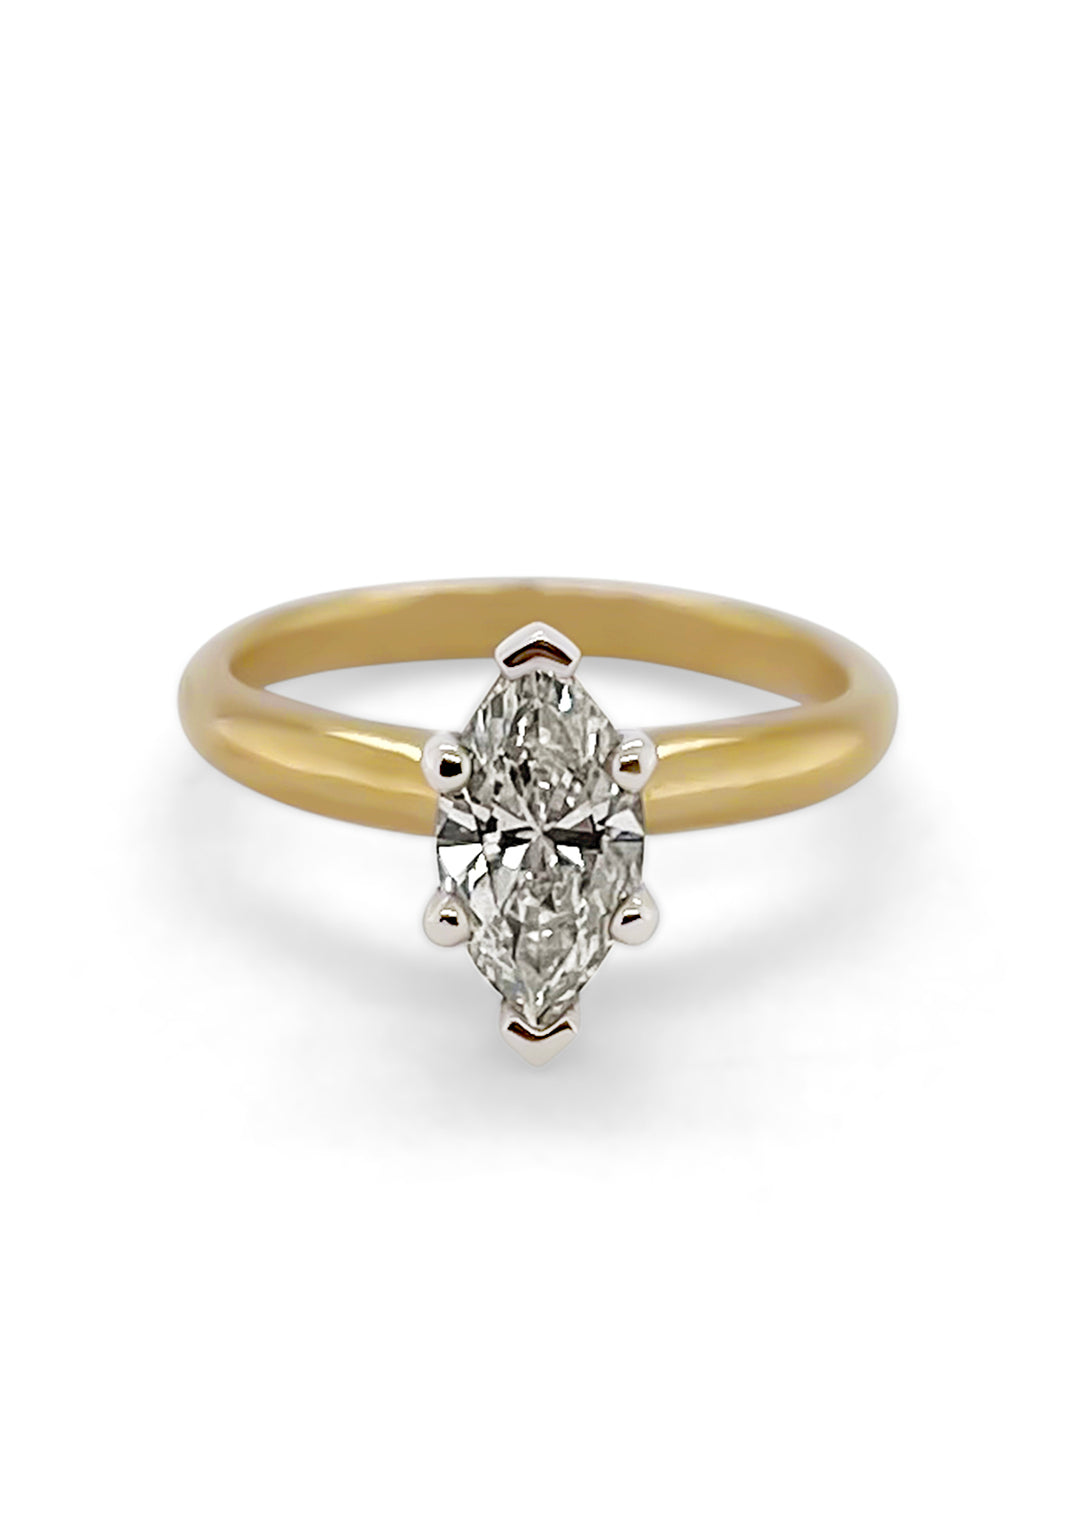 14k Two Tone 1.04 Carat Marquise Diamond Solitaire Engagement Ring